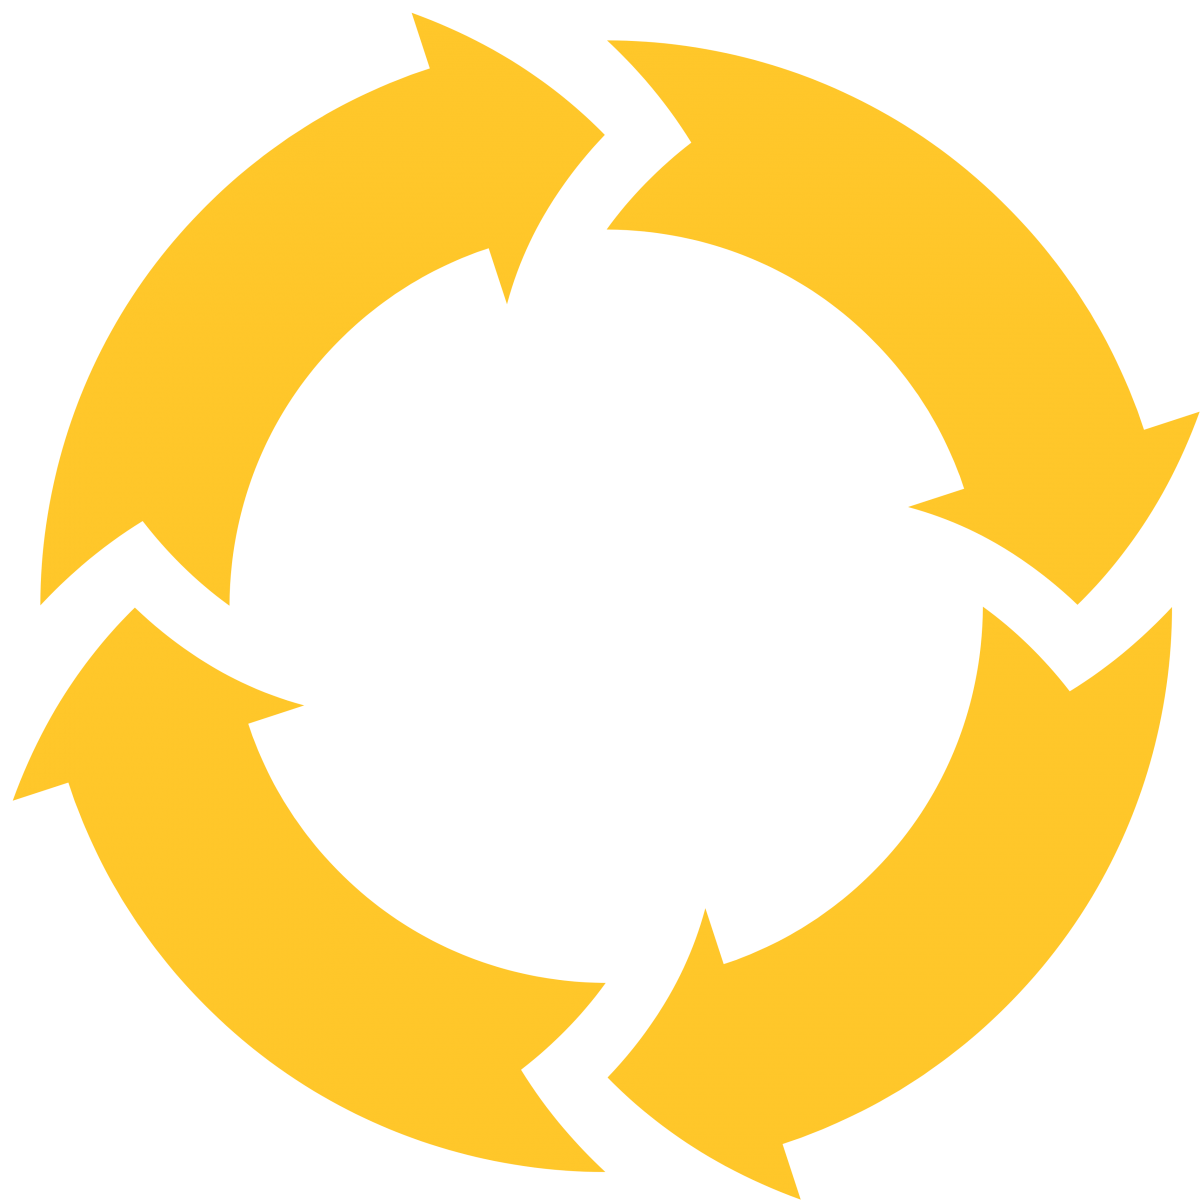 A yellow icon with arrows going in a circle.